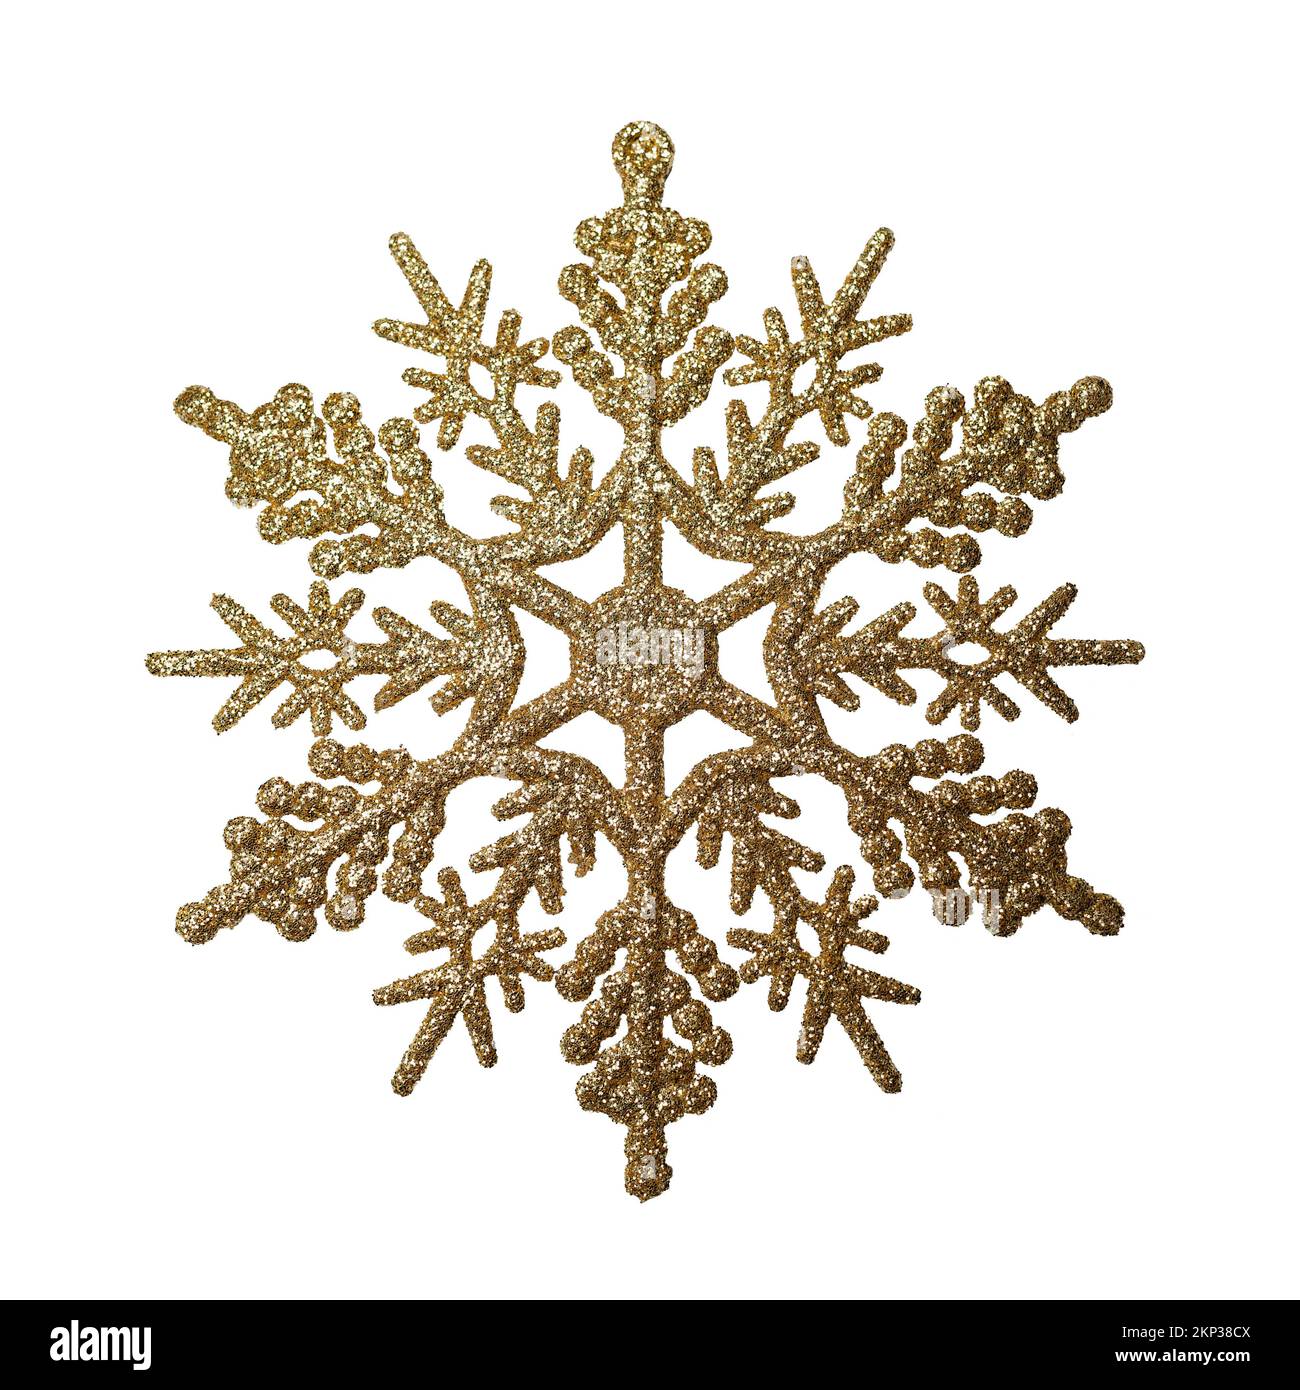 Golden glittered snowflake ornament for Christmas tree decoration with clipping path Stock Photo